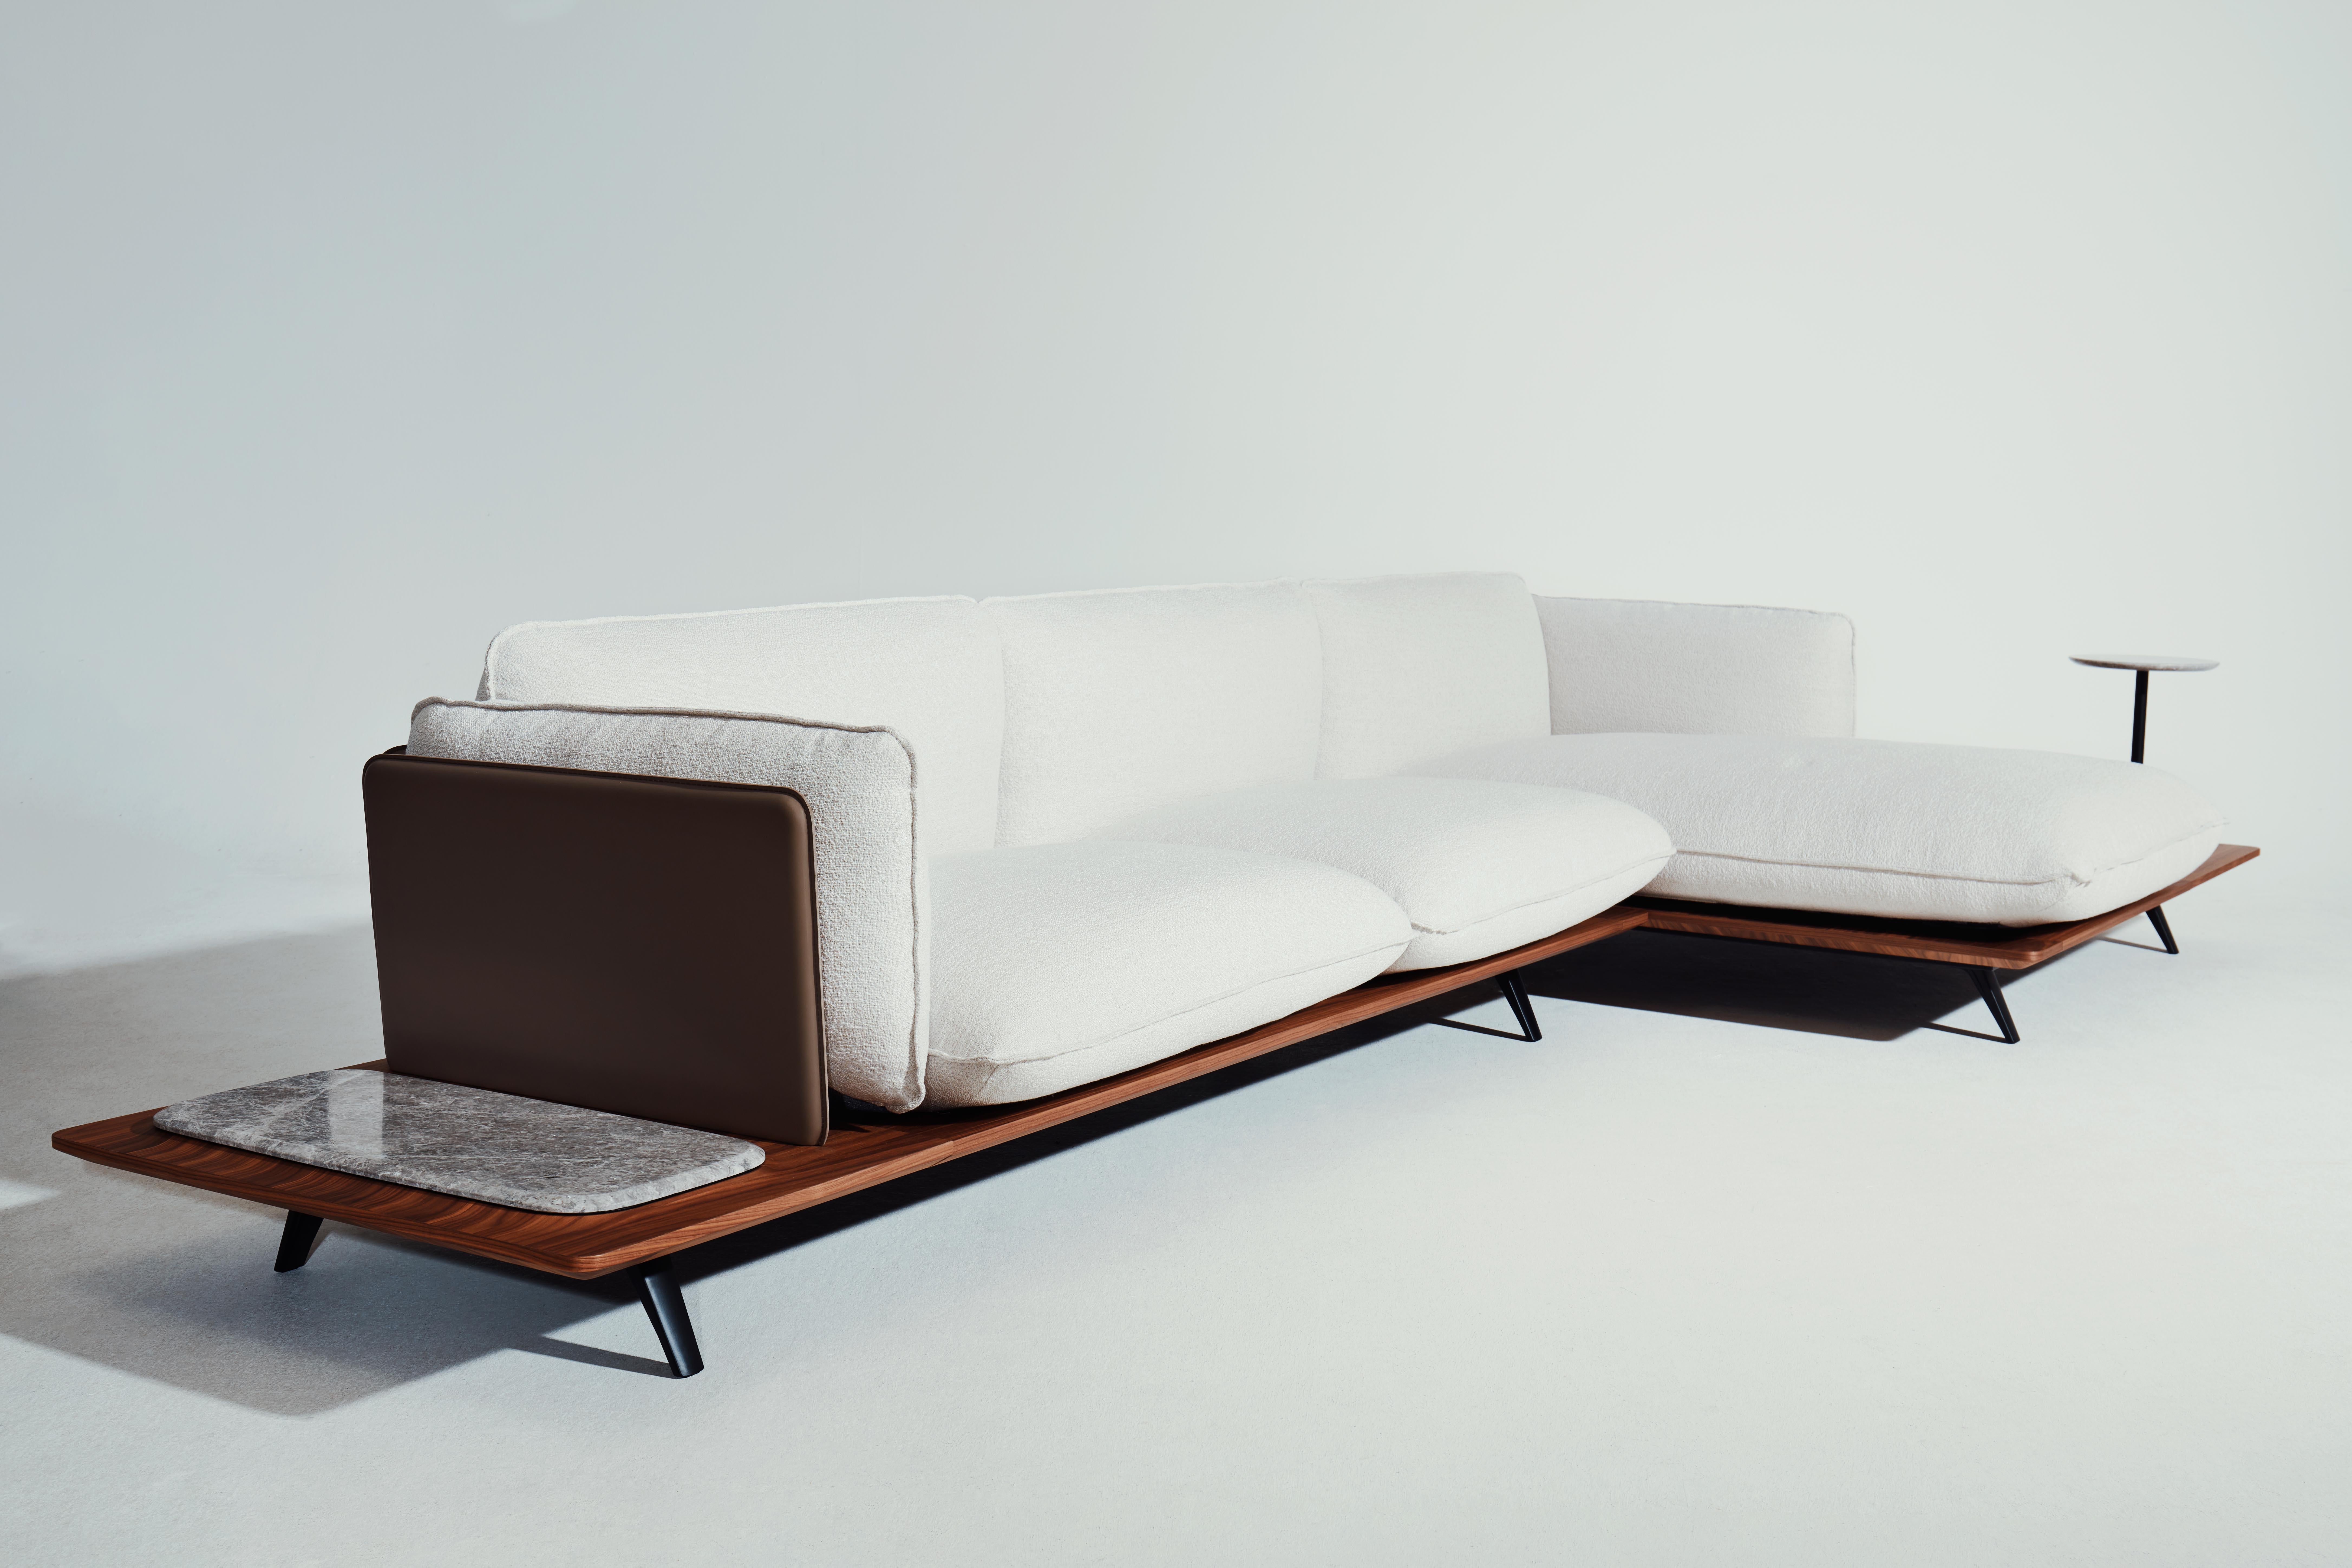 Sahara Sofa by Noé Duchaufour Lawrance In New Condition For Sale In Geneve, CH